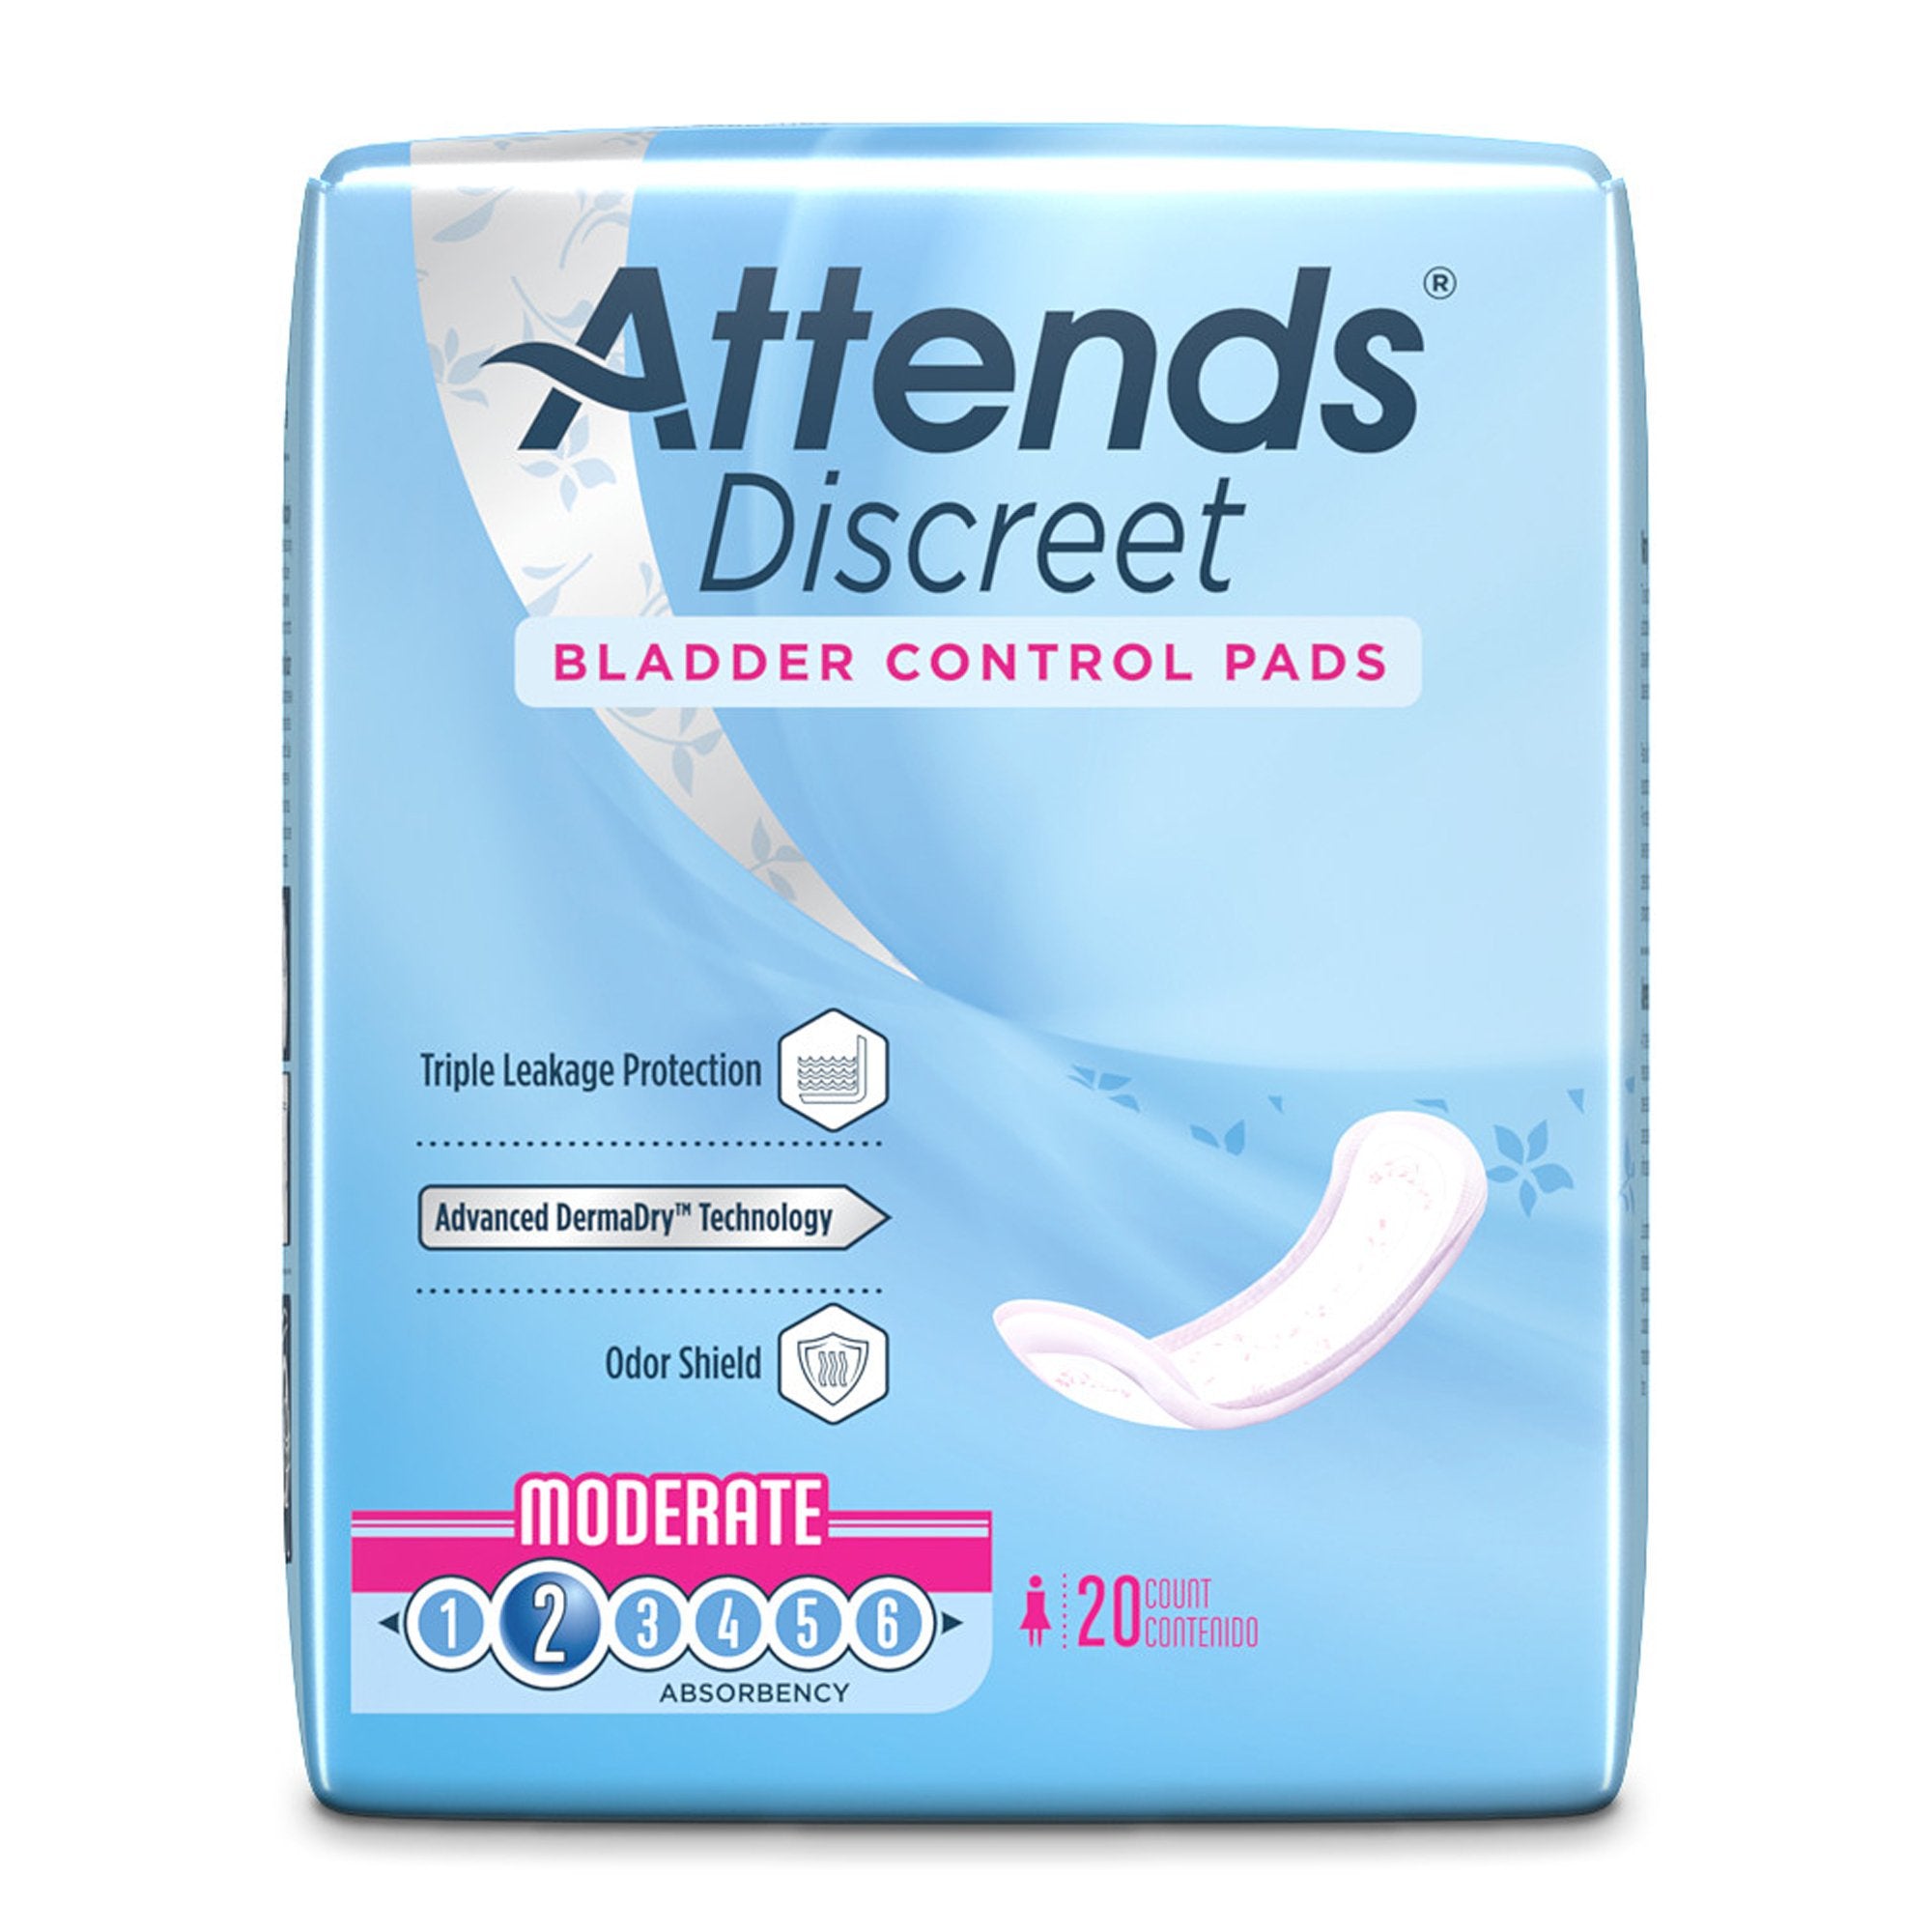 Bladder Control Pad Attends® Discreet 10-1/2 Inch Length Moderate Absorbency Polymer Core One Size Fits Most